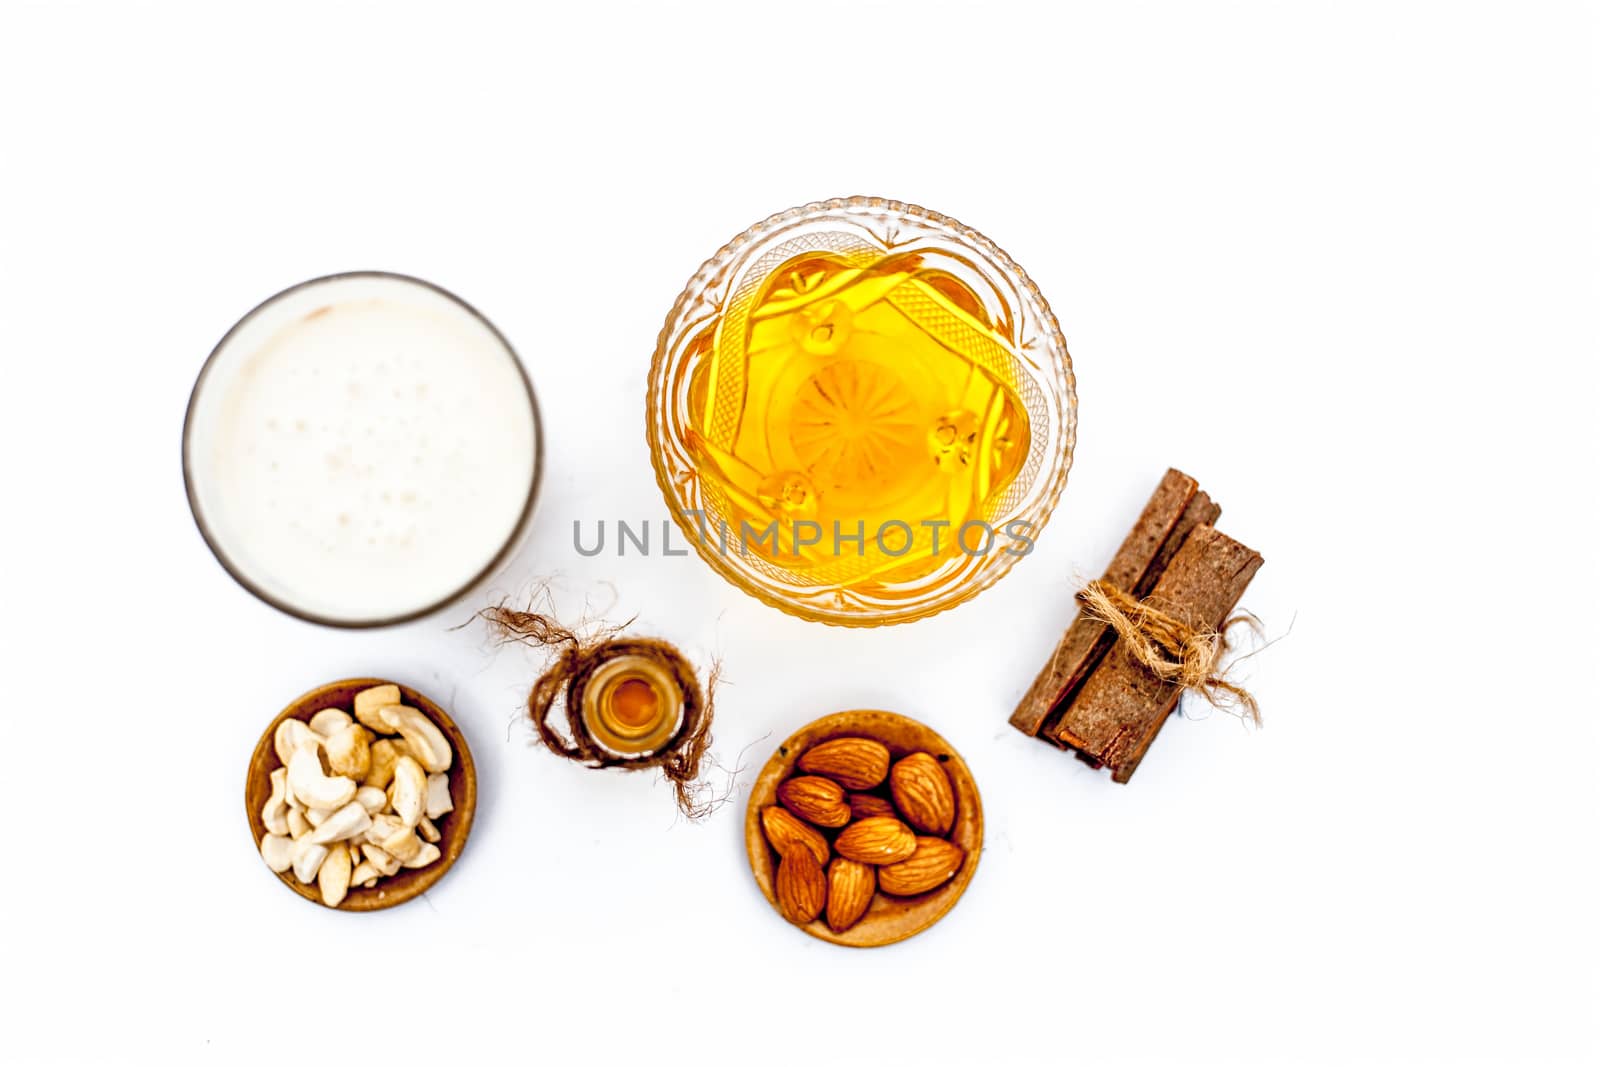 Close up of popular Indian & Asian winter drink isolated on white i.e Honey milk or shahad ka dudh in a transparent glass with entire ingredients which are milk,honey, and dry fruits.